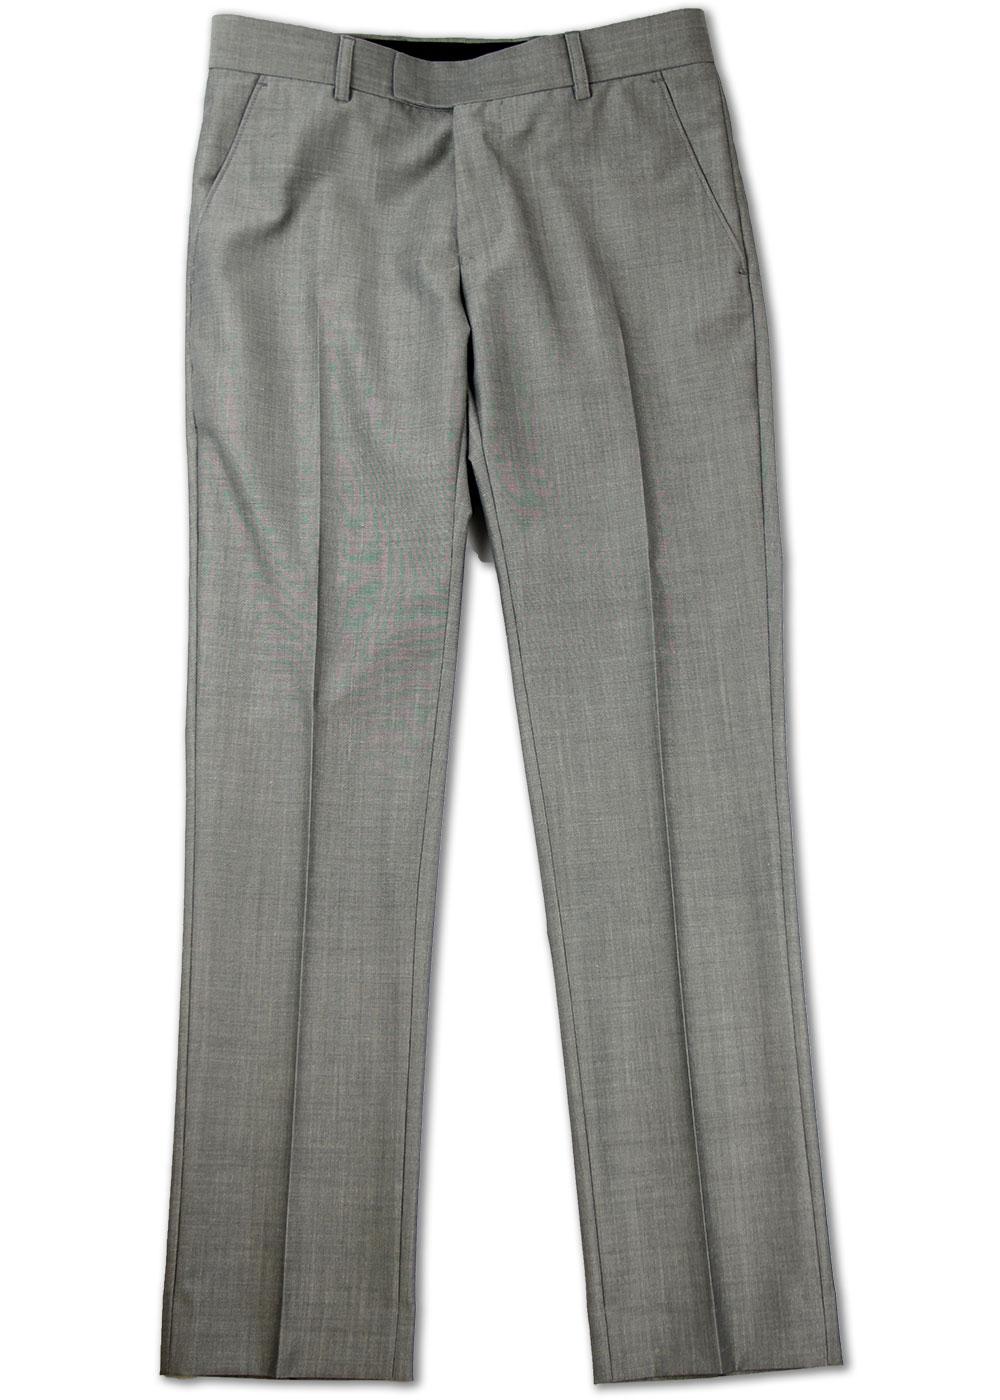 Madcap England Fab 4 Button Mod Suit in Silver Mohair Tonic